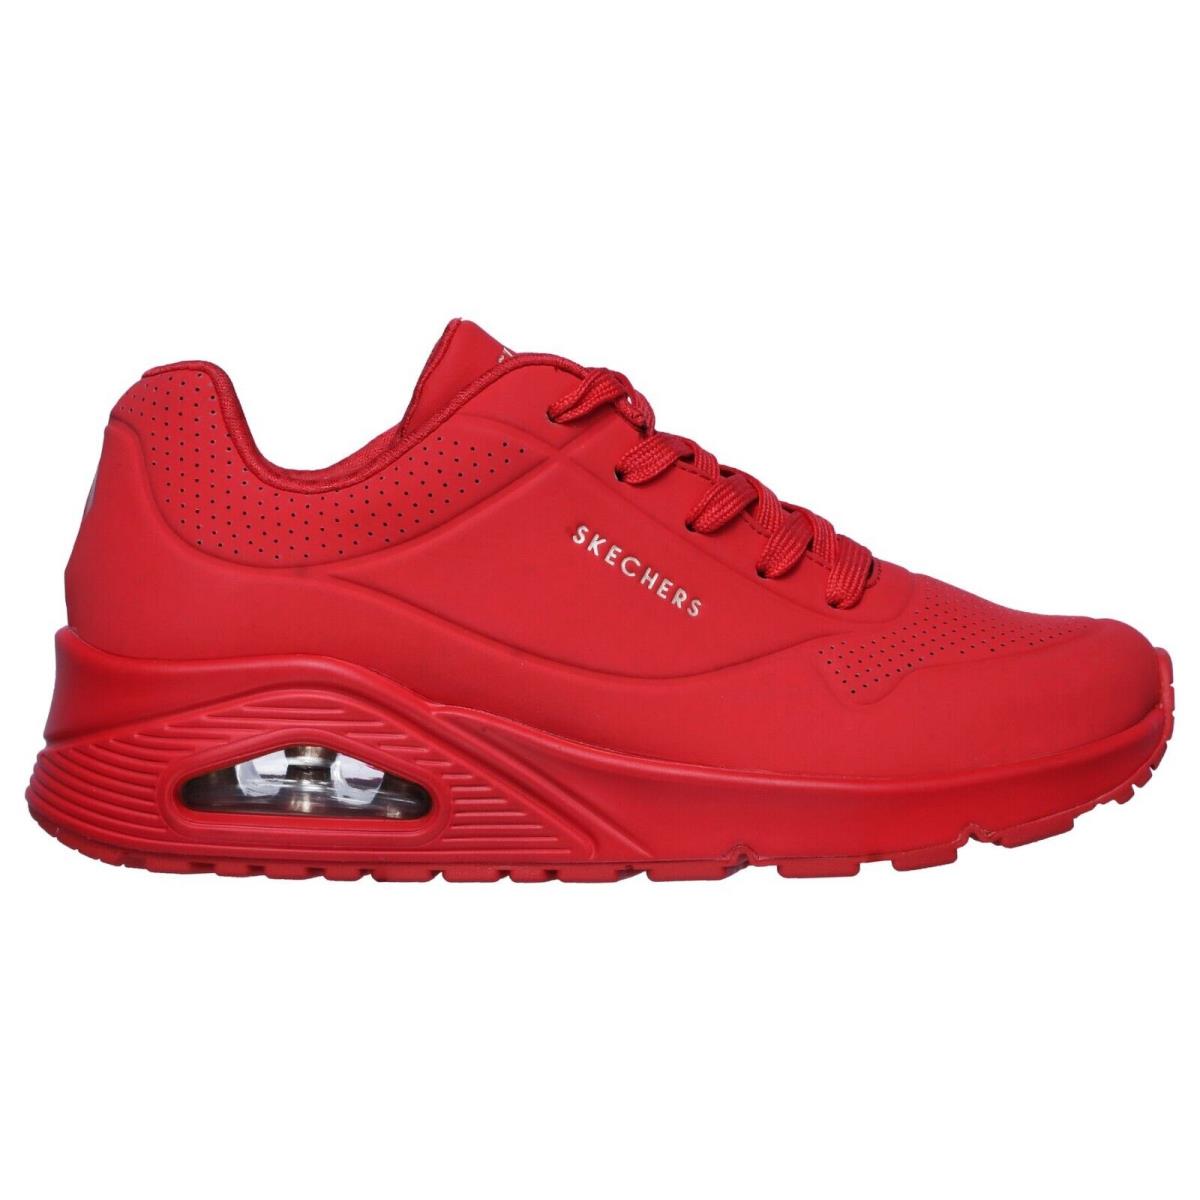 Skechers shoes  - Red 16